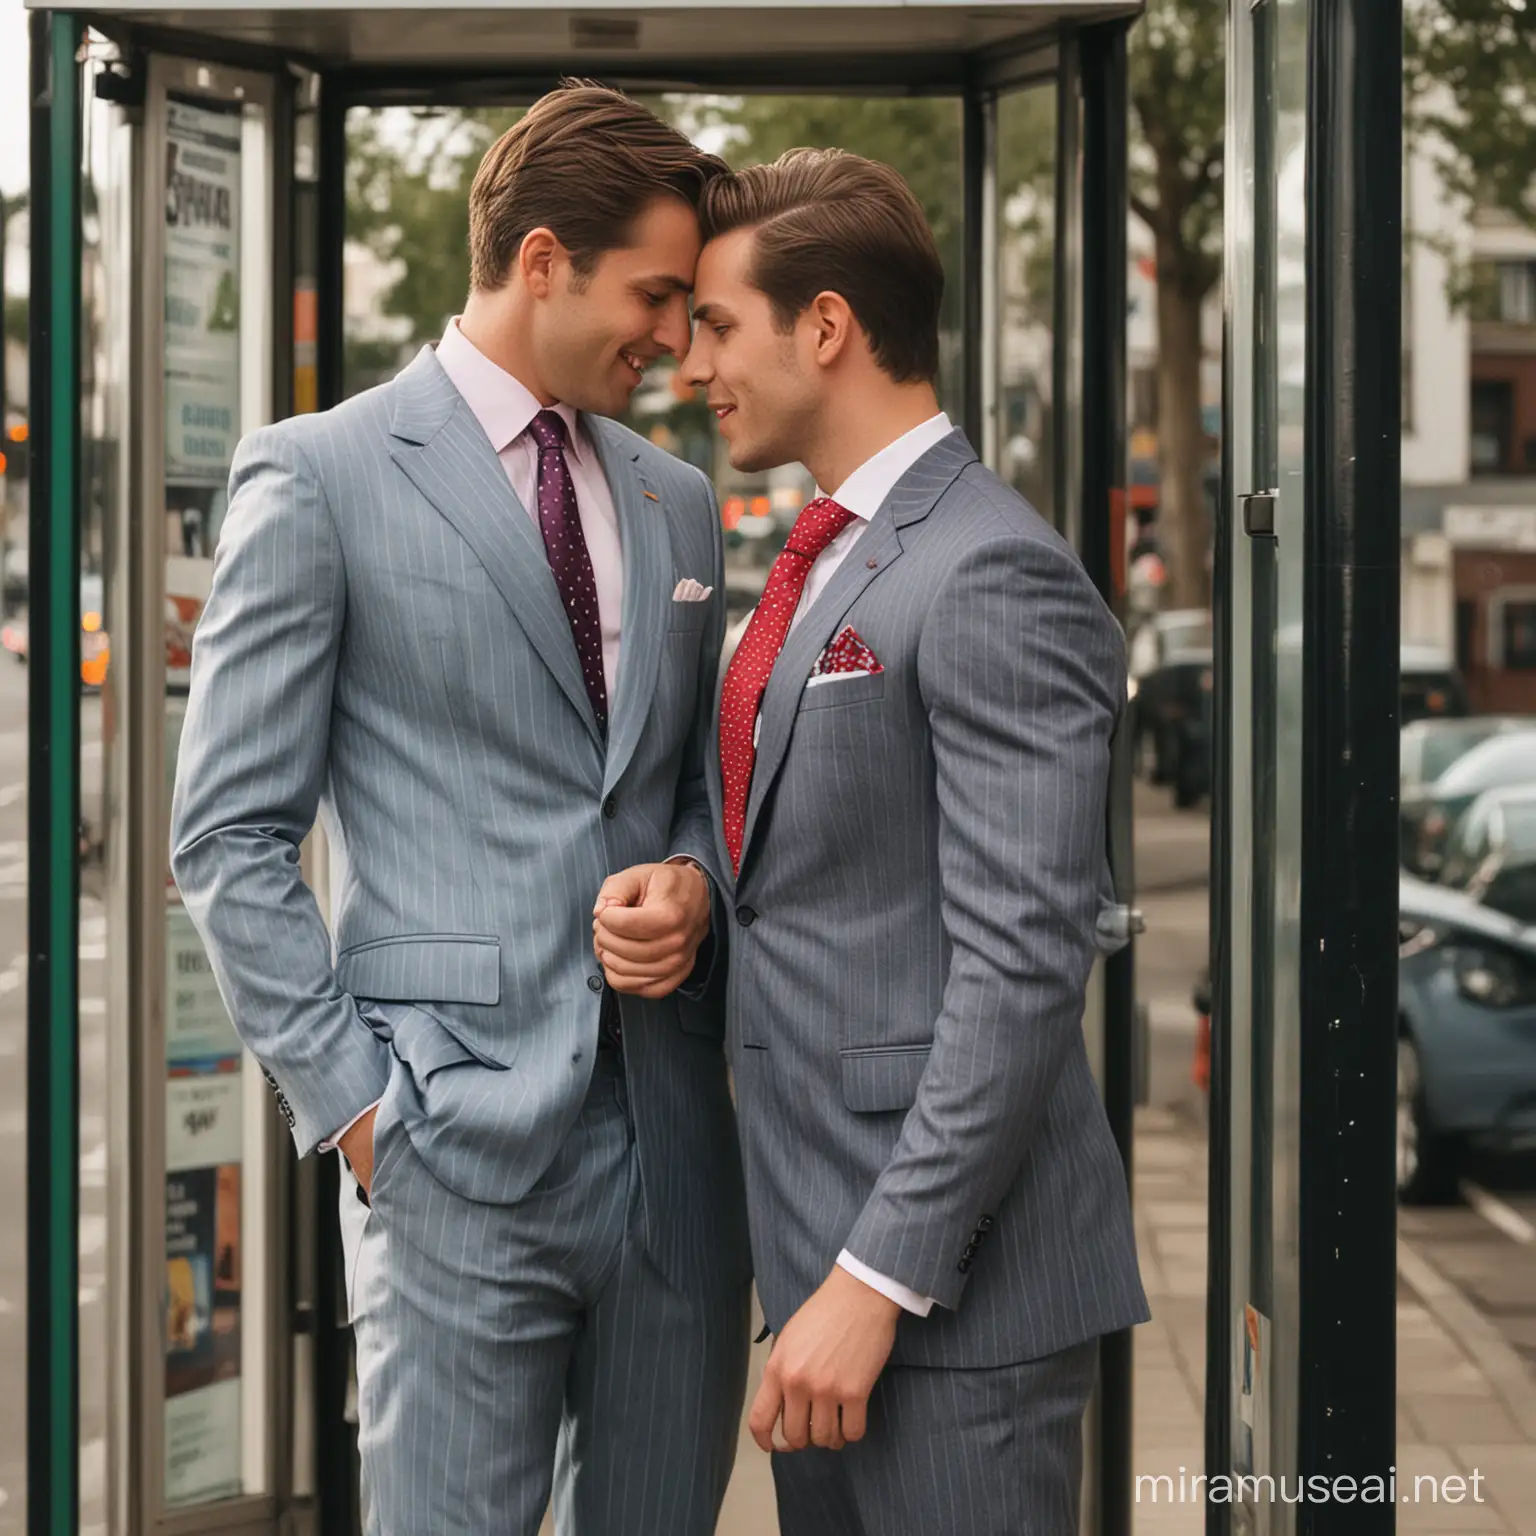 Men in Vibrant Pinstripe Suits Flirting at Bus Stop